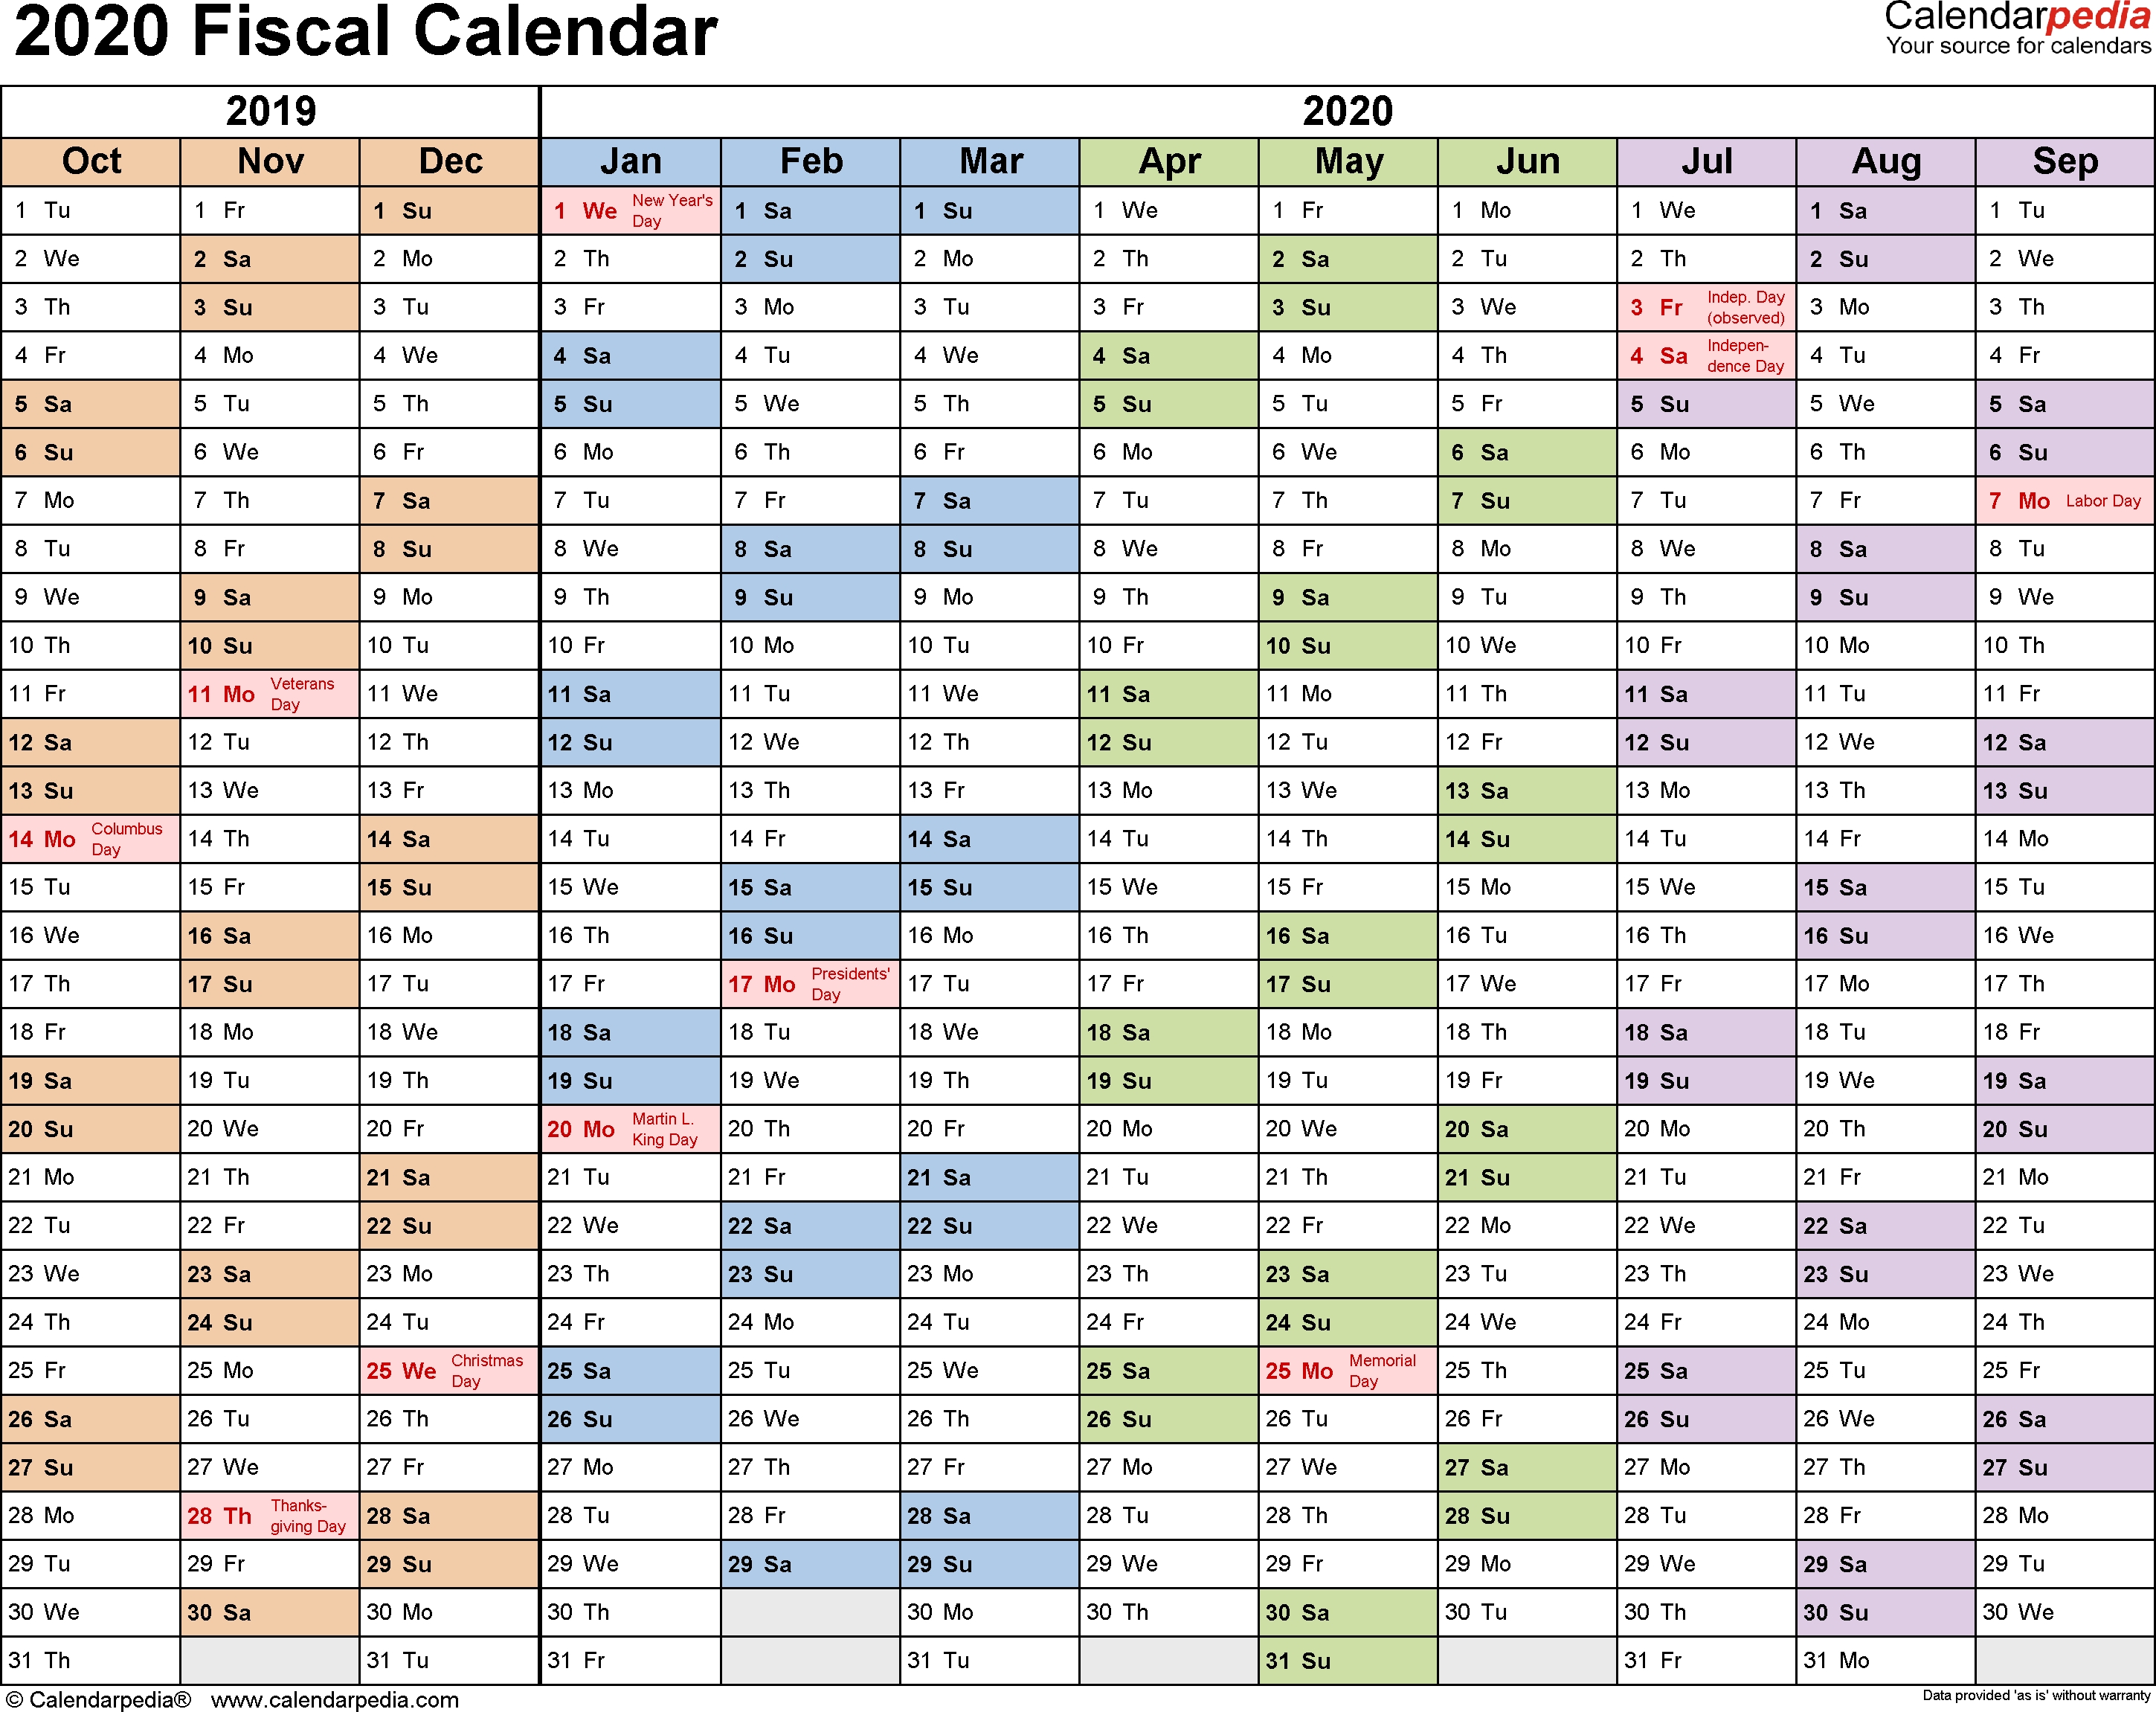 Fiscal Calendars 2020 - Free Printable Word Templates in 4 5 5 Fiscal 2020 Calendar